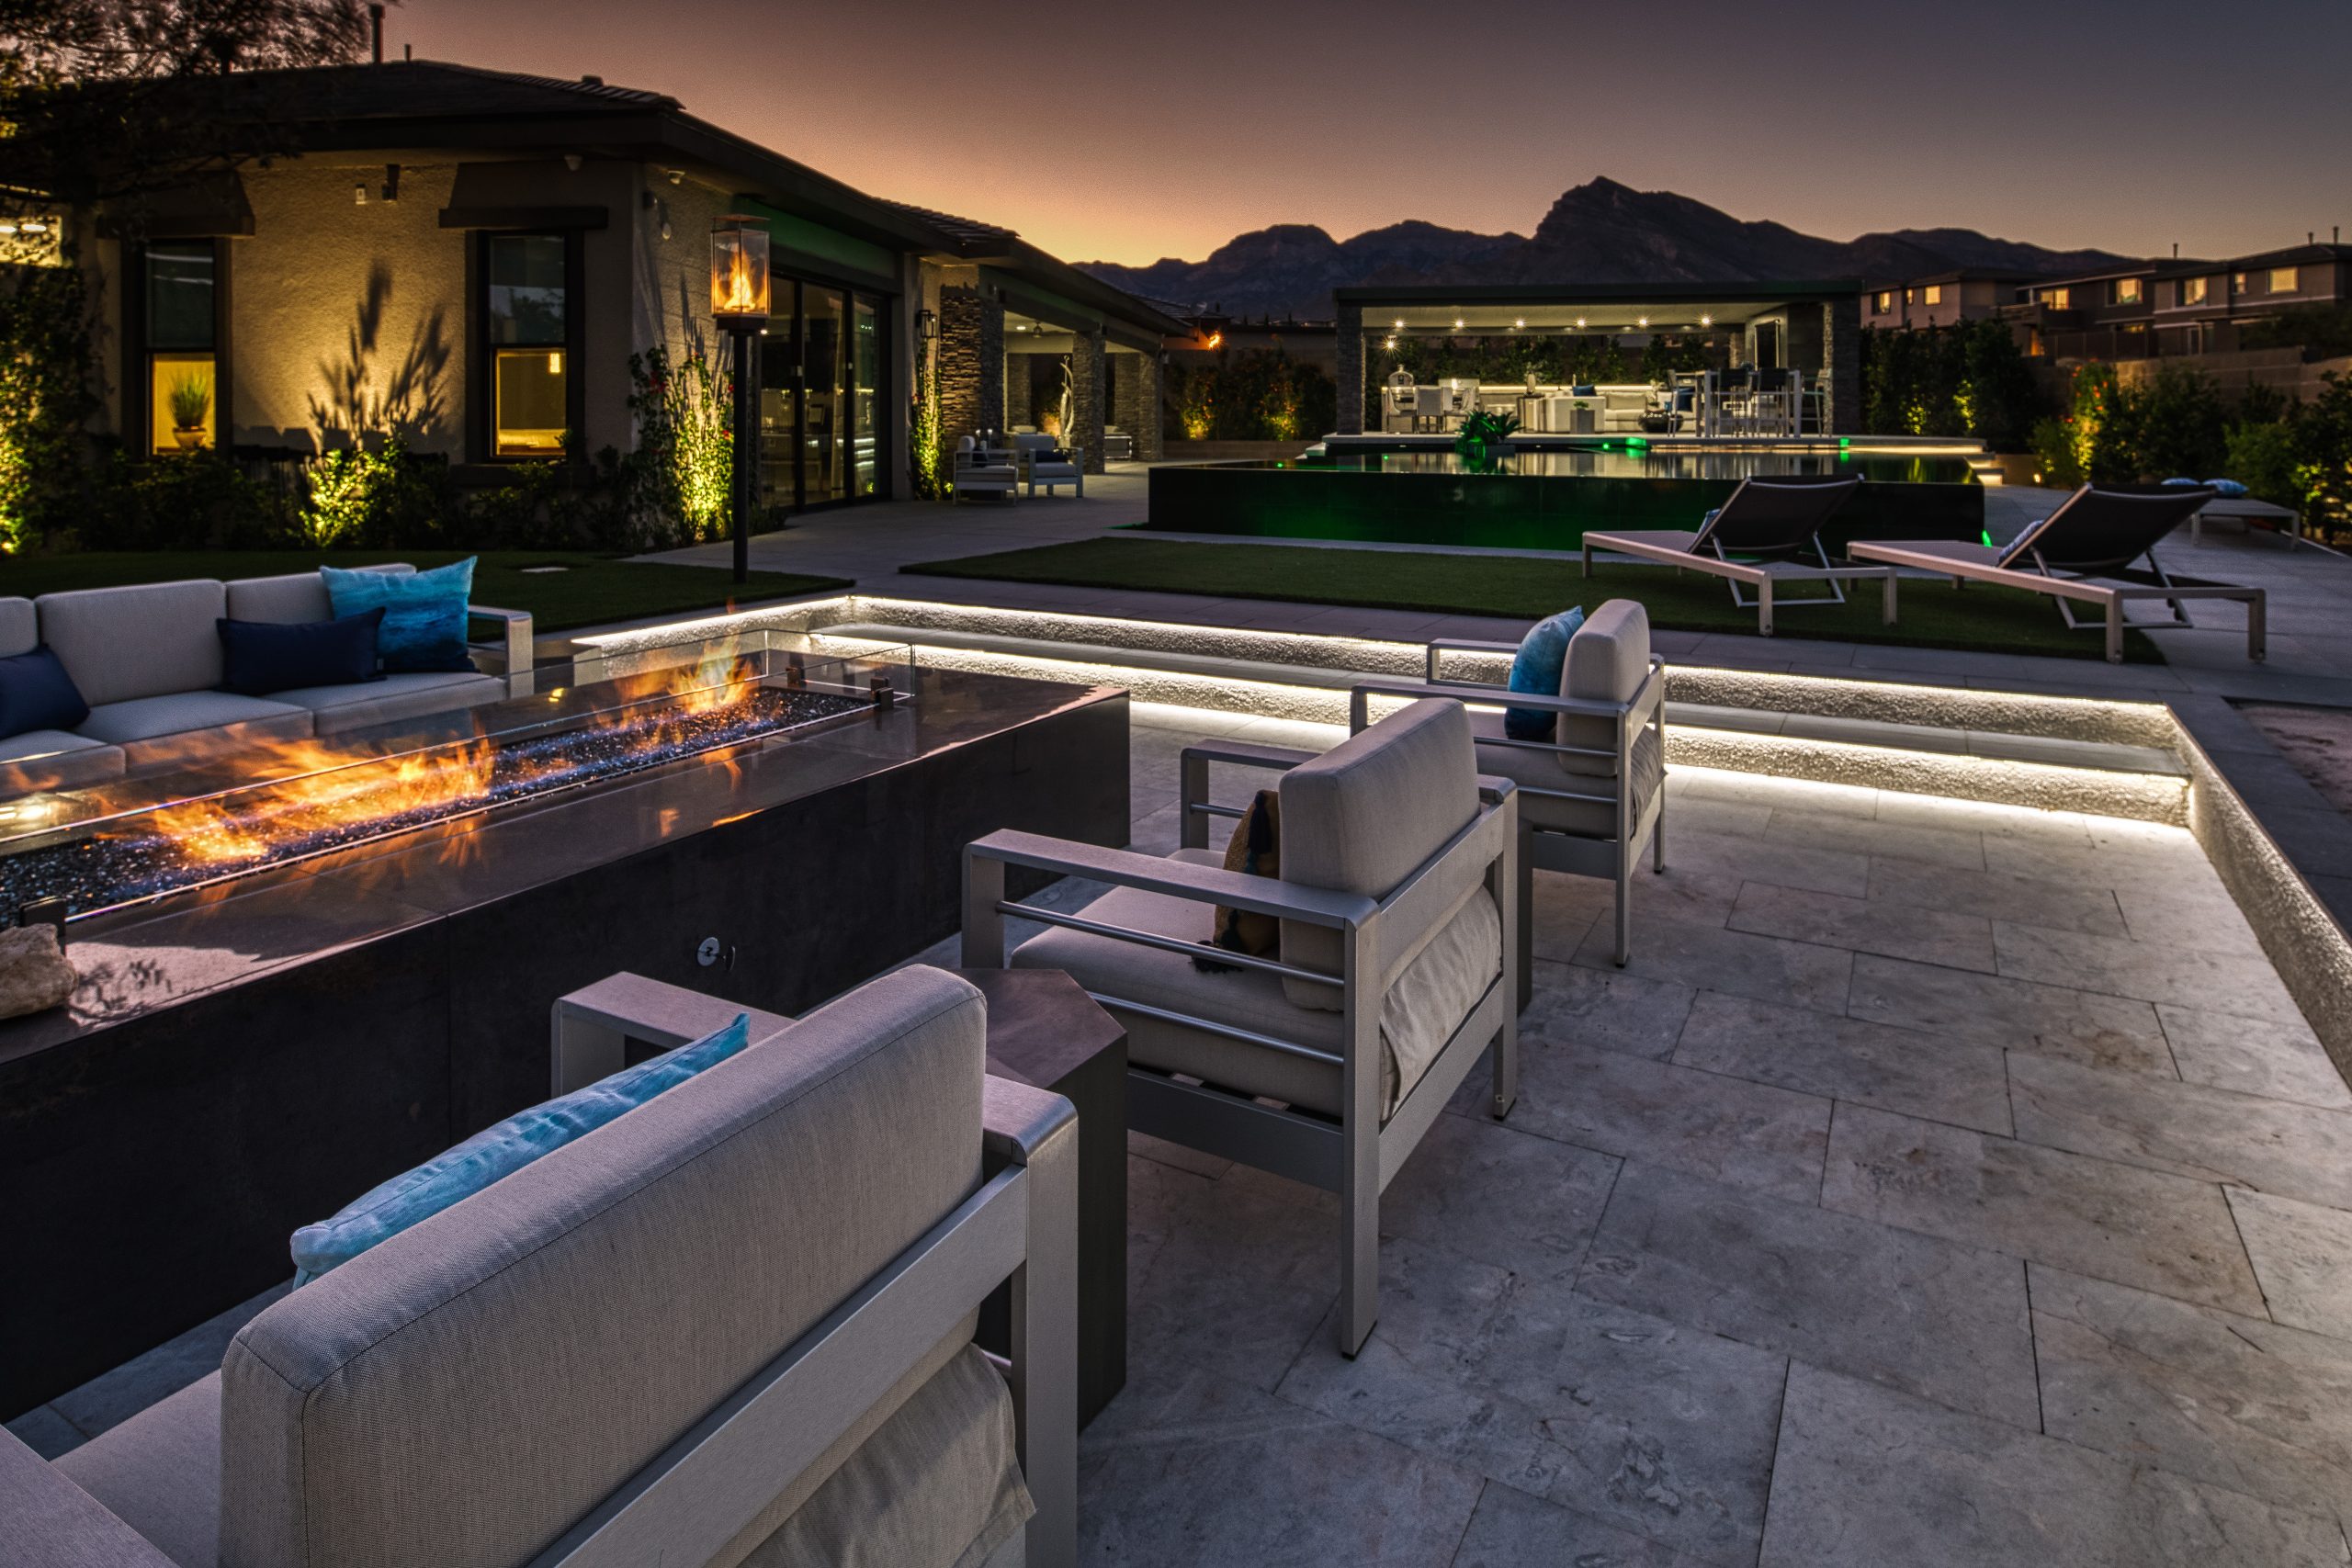 Outdoor Living Photo Gallery - Southern Vegas Valley Contracting